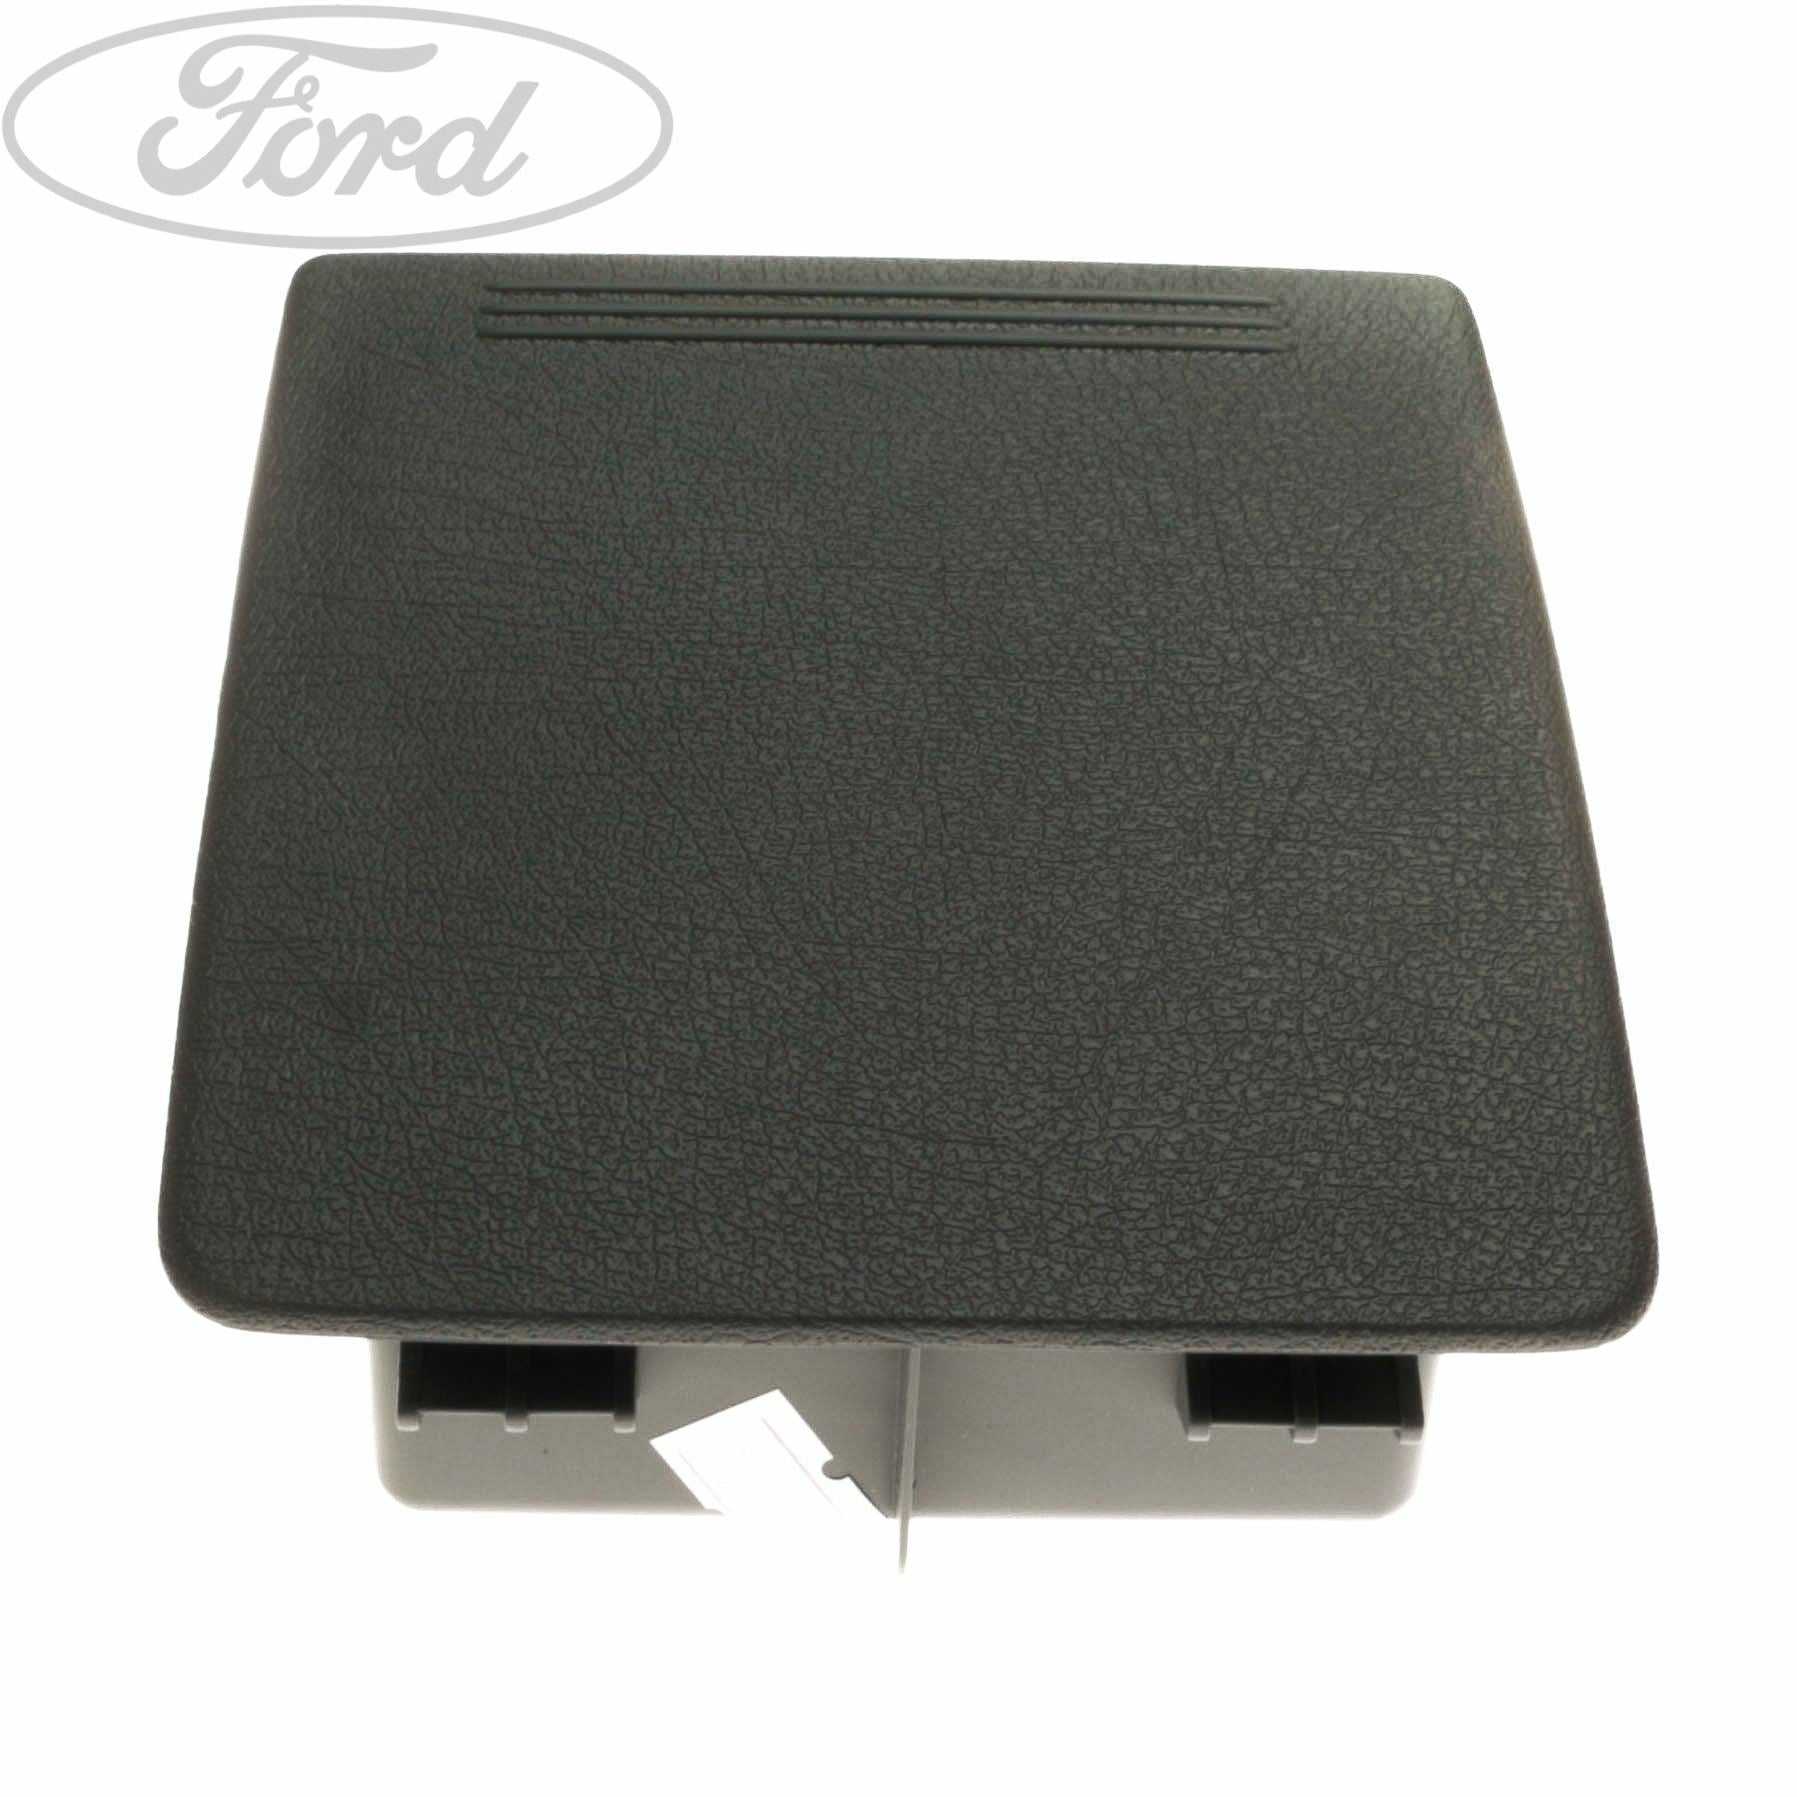 Ford, STOWAGE BOX DOOR